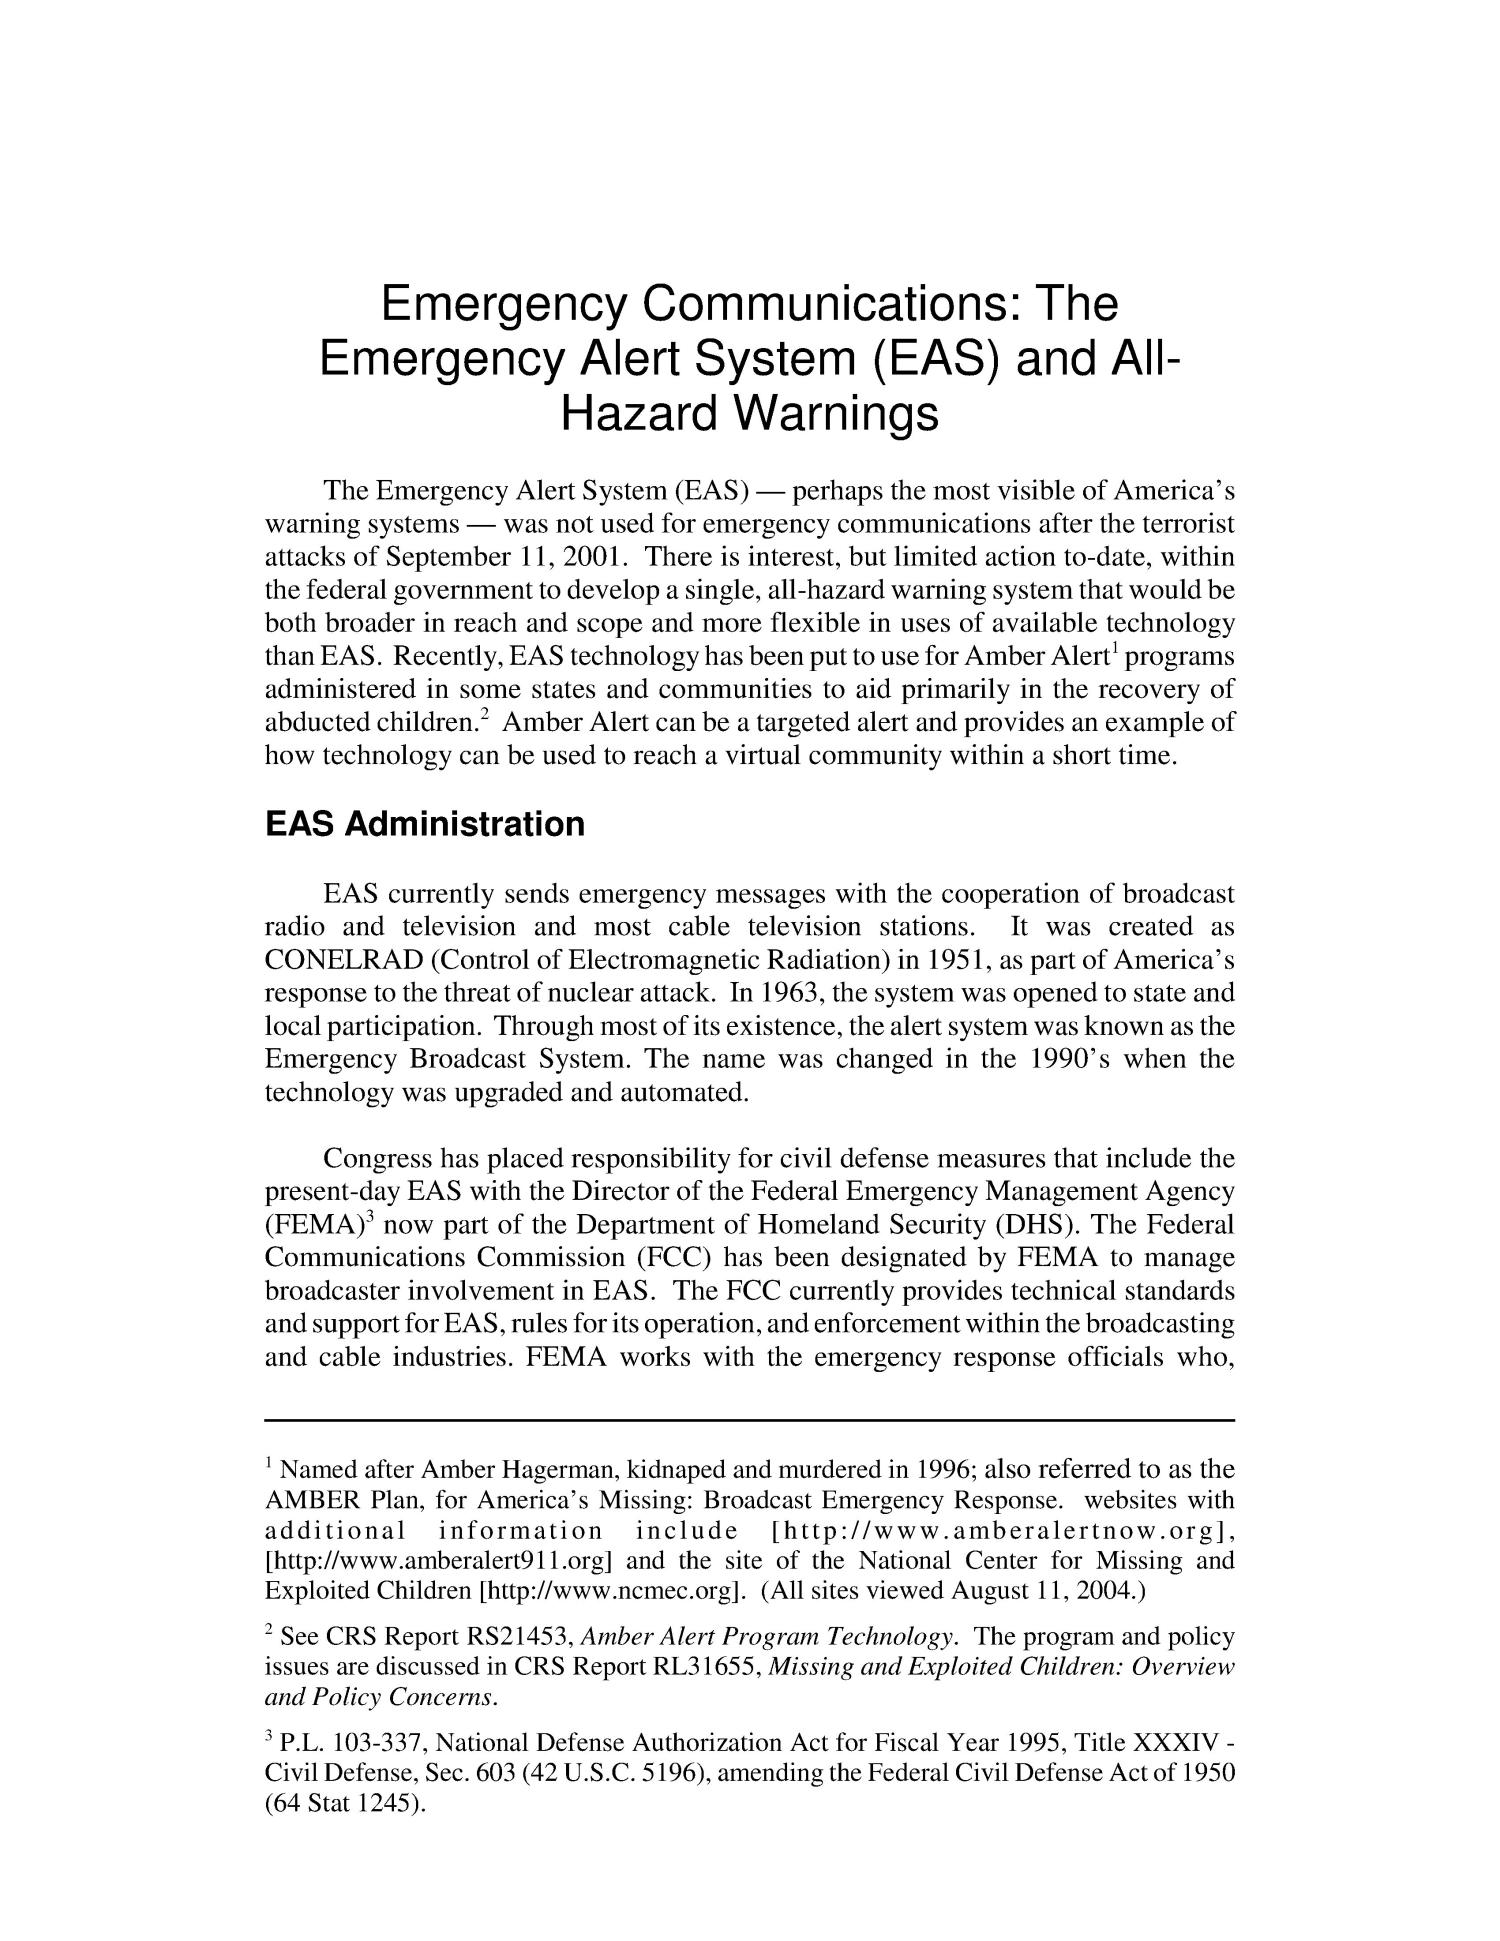 Emergency Communications: The Emergency Alert System (EAS) and All-Hazard Warnings
                                                
                                                    [Sequence #]: 4 of 11
                                                